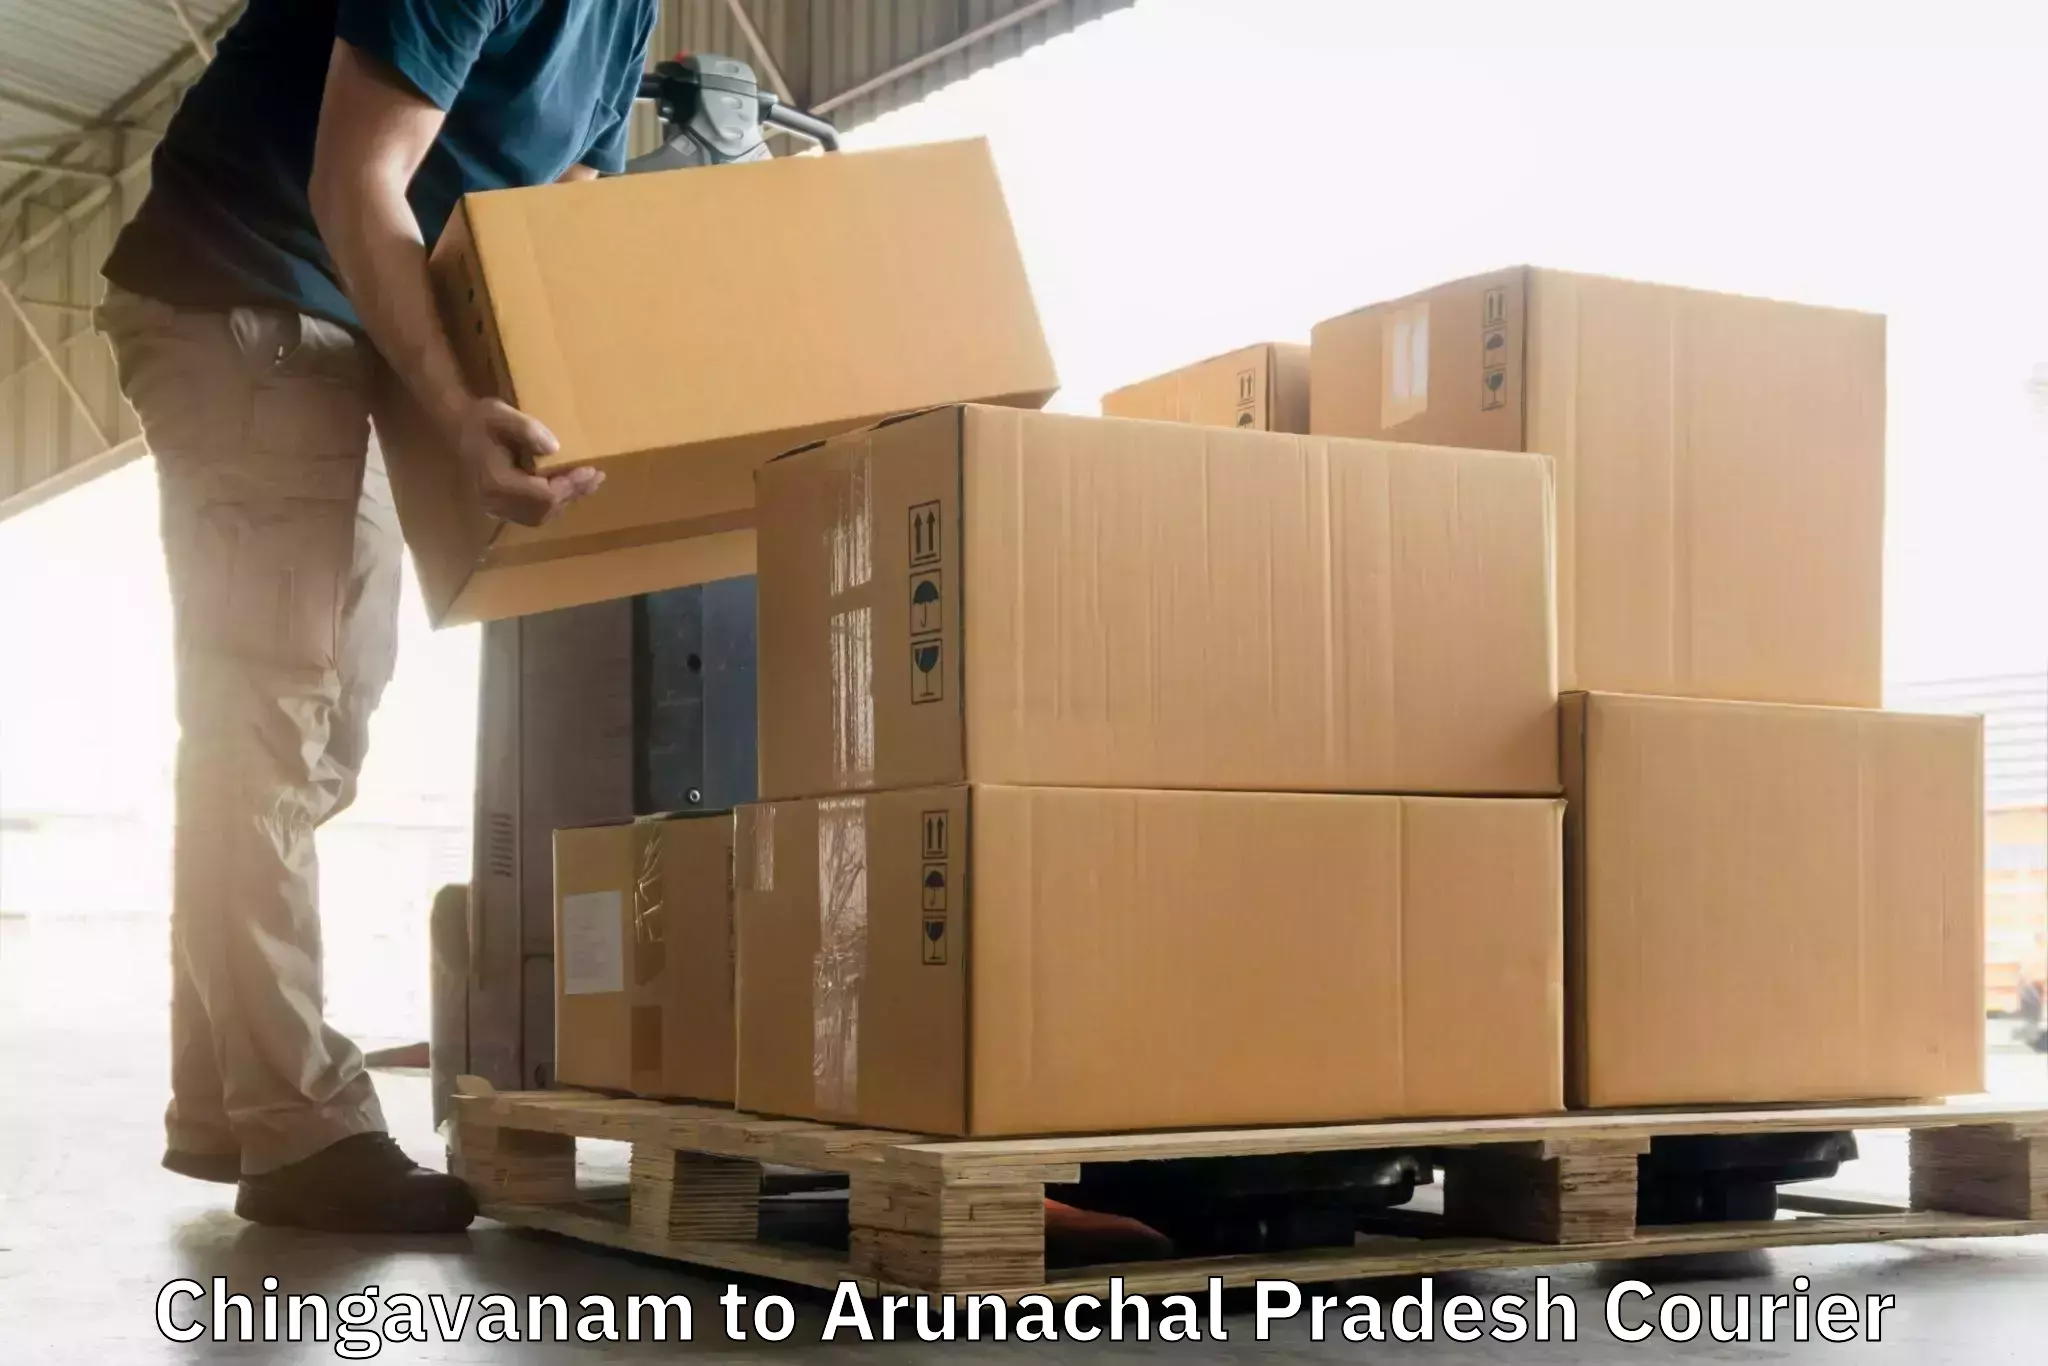 Express package delivery Chingavanam to Itanagar